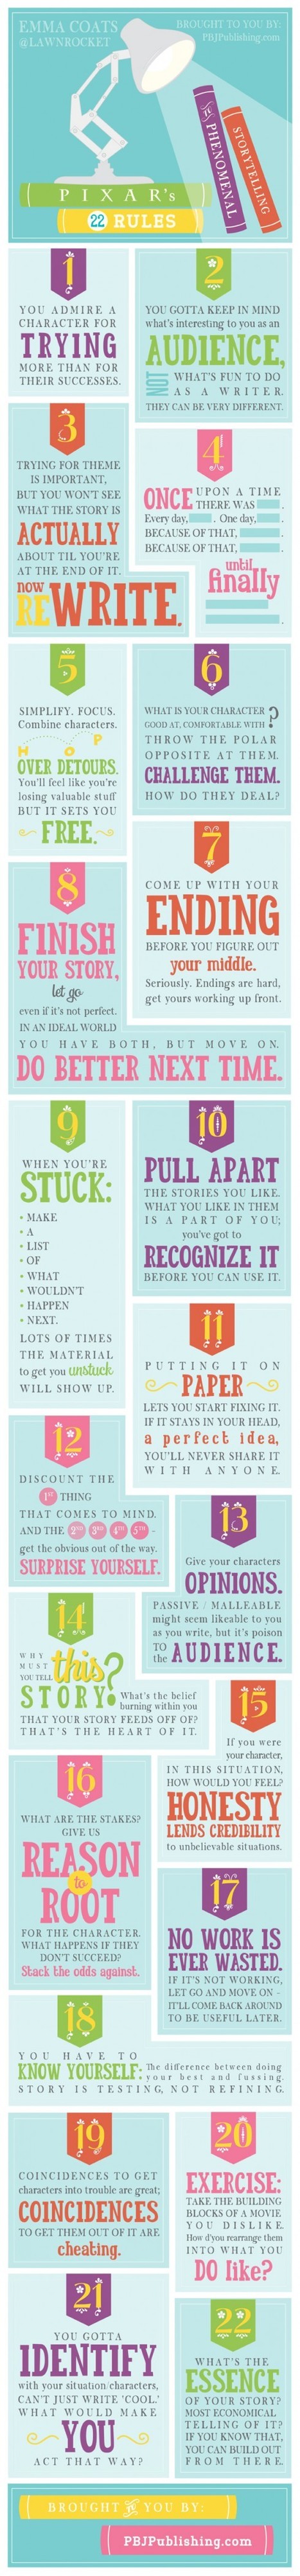 Pixar’s 22 Rules to Phenomenal Storytelling [INFOGRAPHIC] | gpmt | Scoop.it